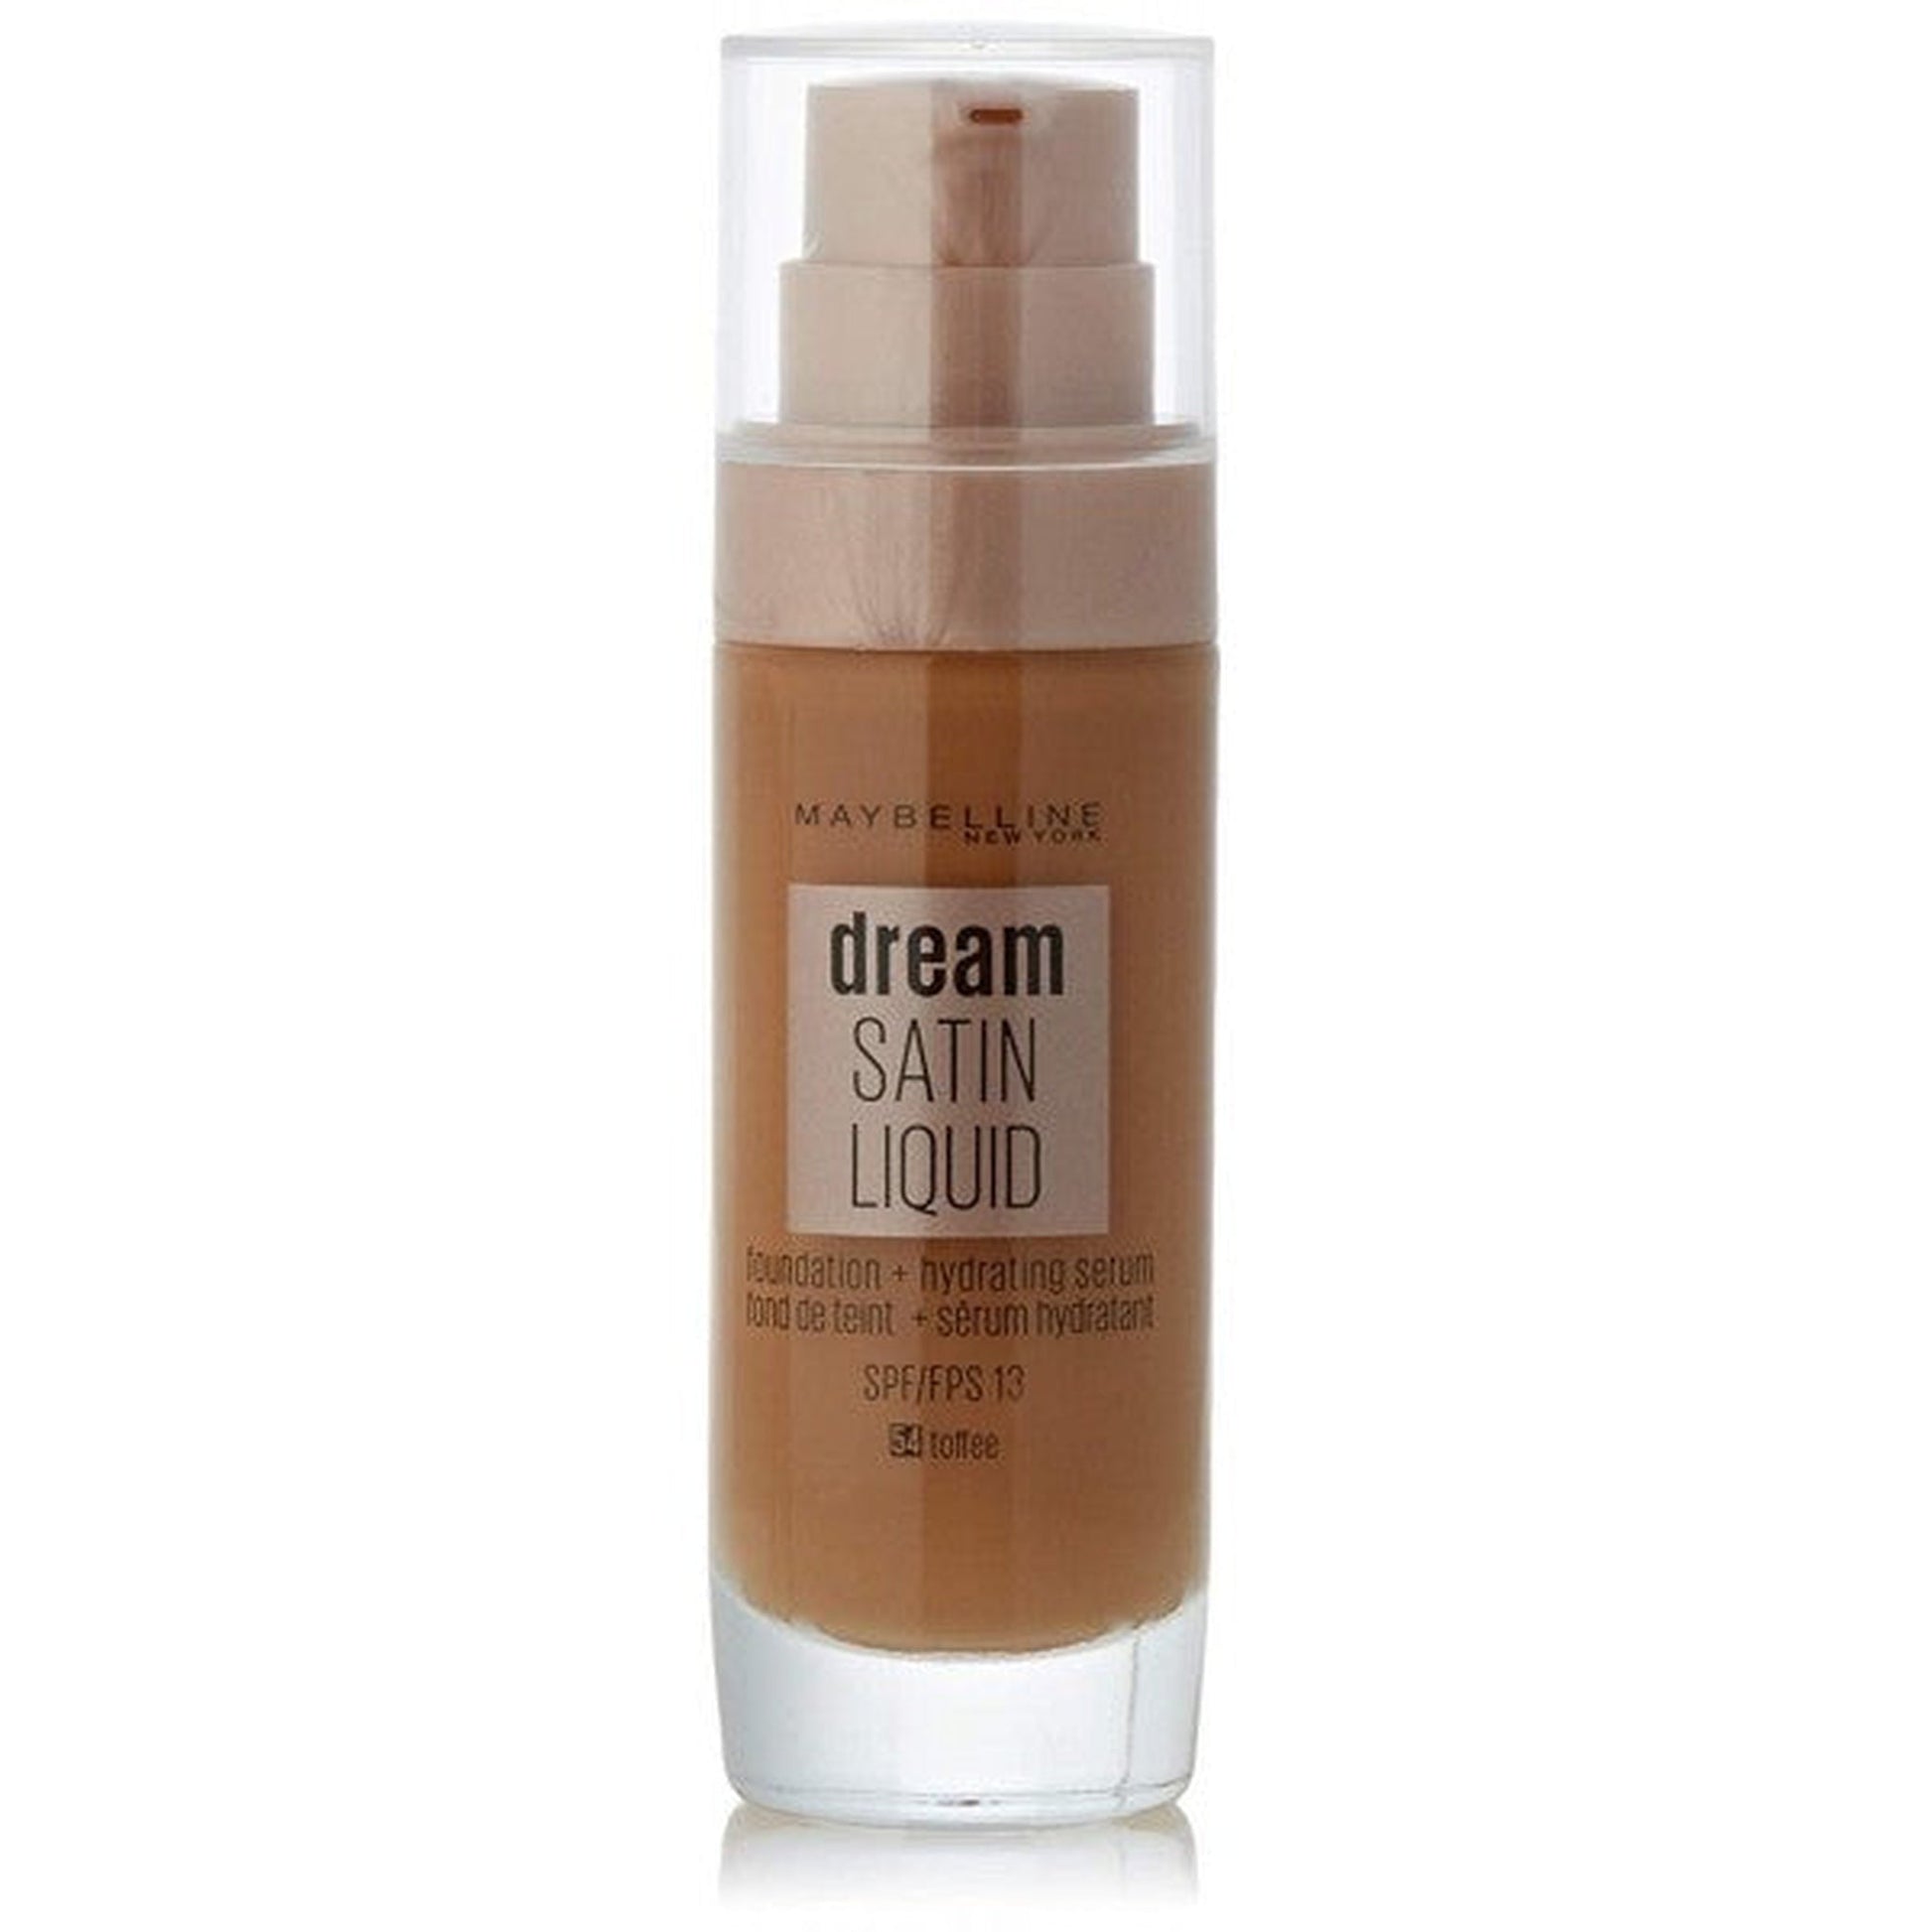 Maybelline Dream Satin Liquid Foundation 54 Toffee-Maybelline-BeautyNmakeup.co.uk